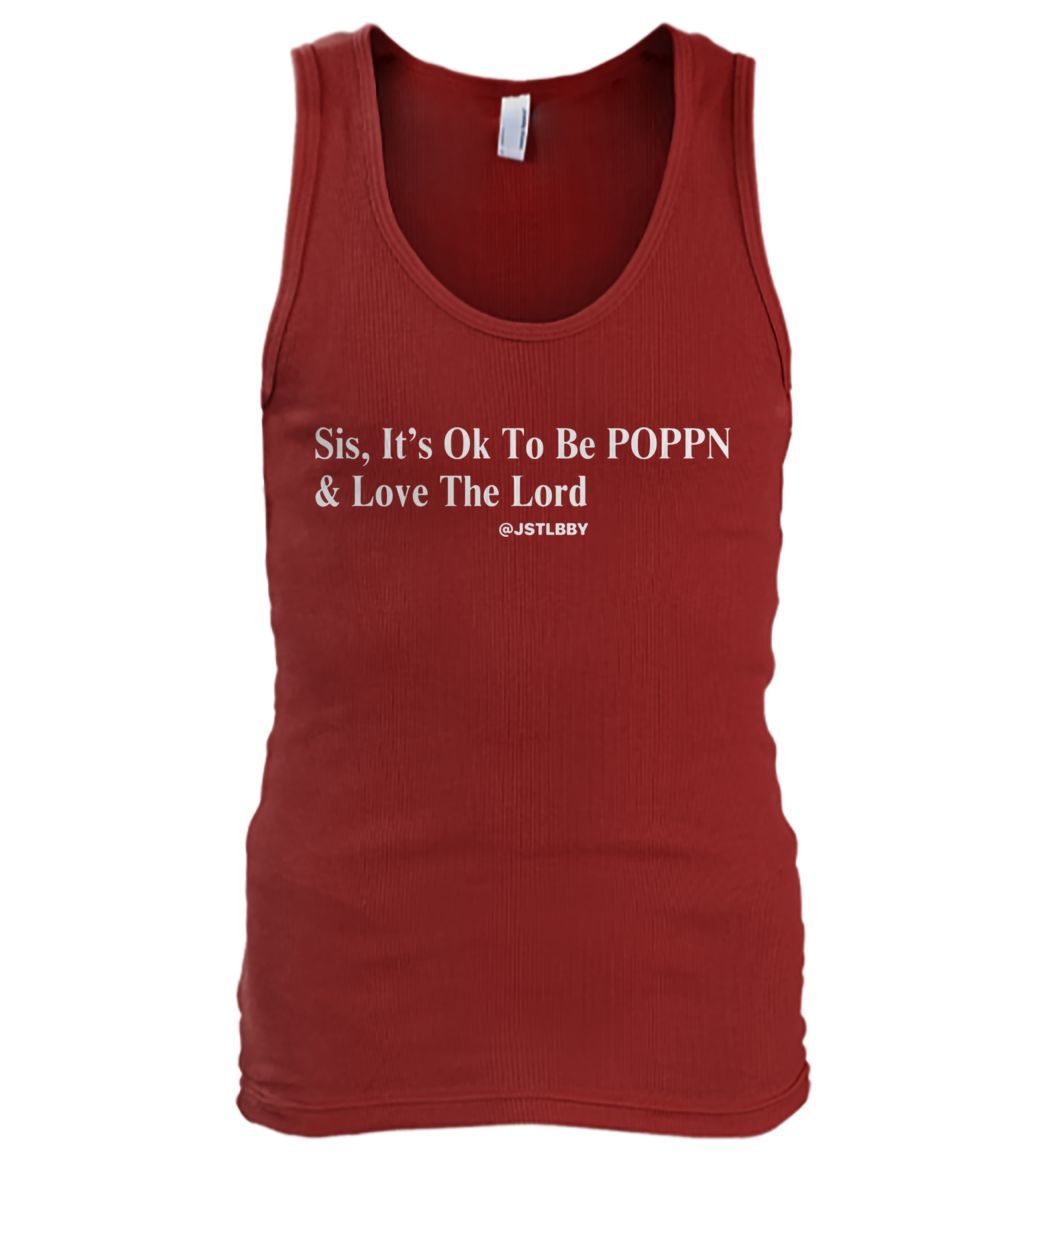 Sis it's ok to be poppn and love the lord men's tank top